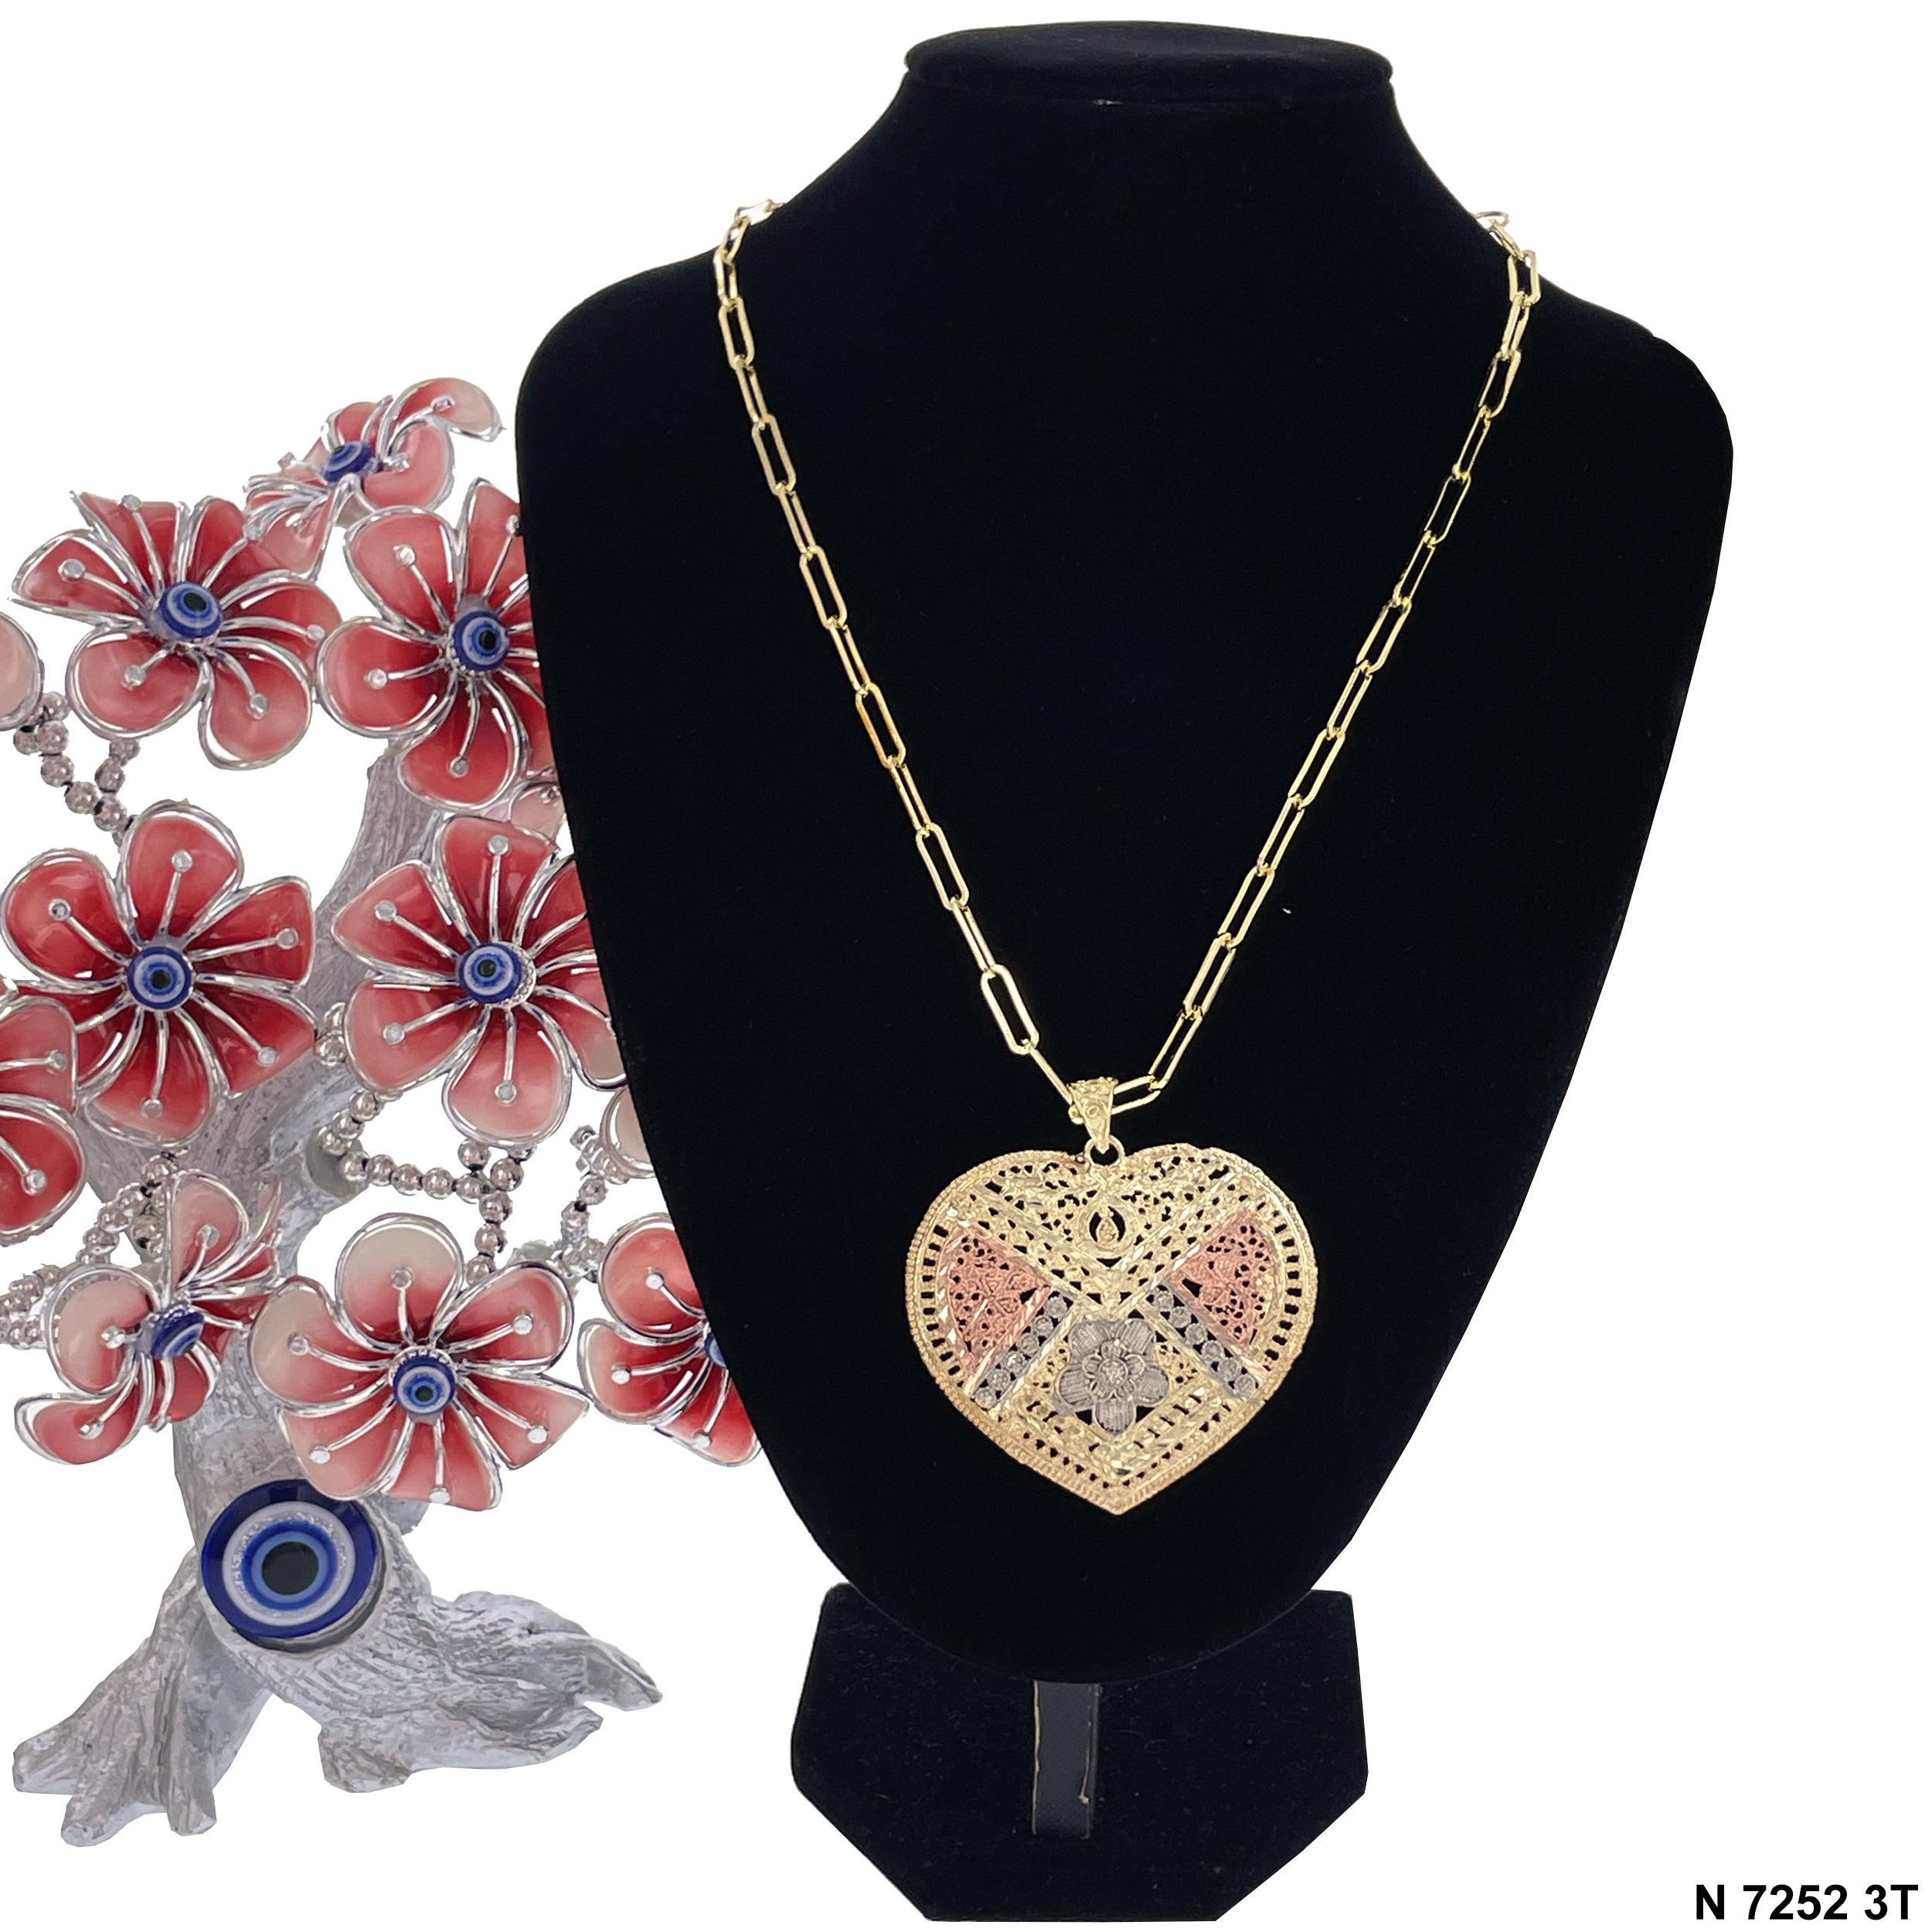 Heart Filigree Paper Clip Chain Necklace N 7252 3T